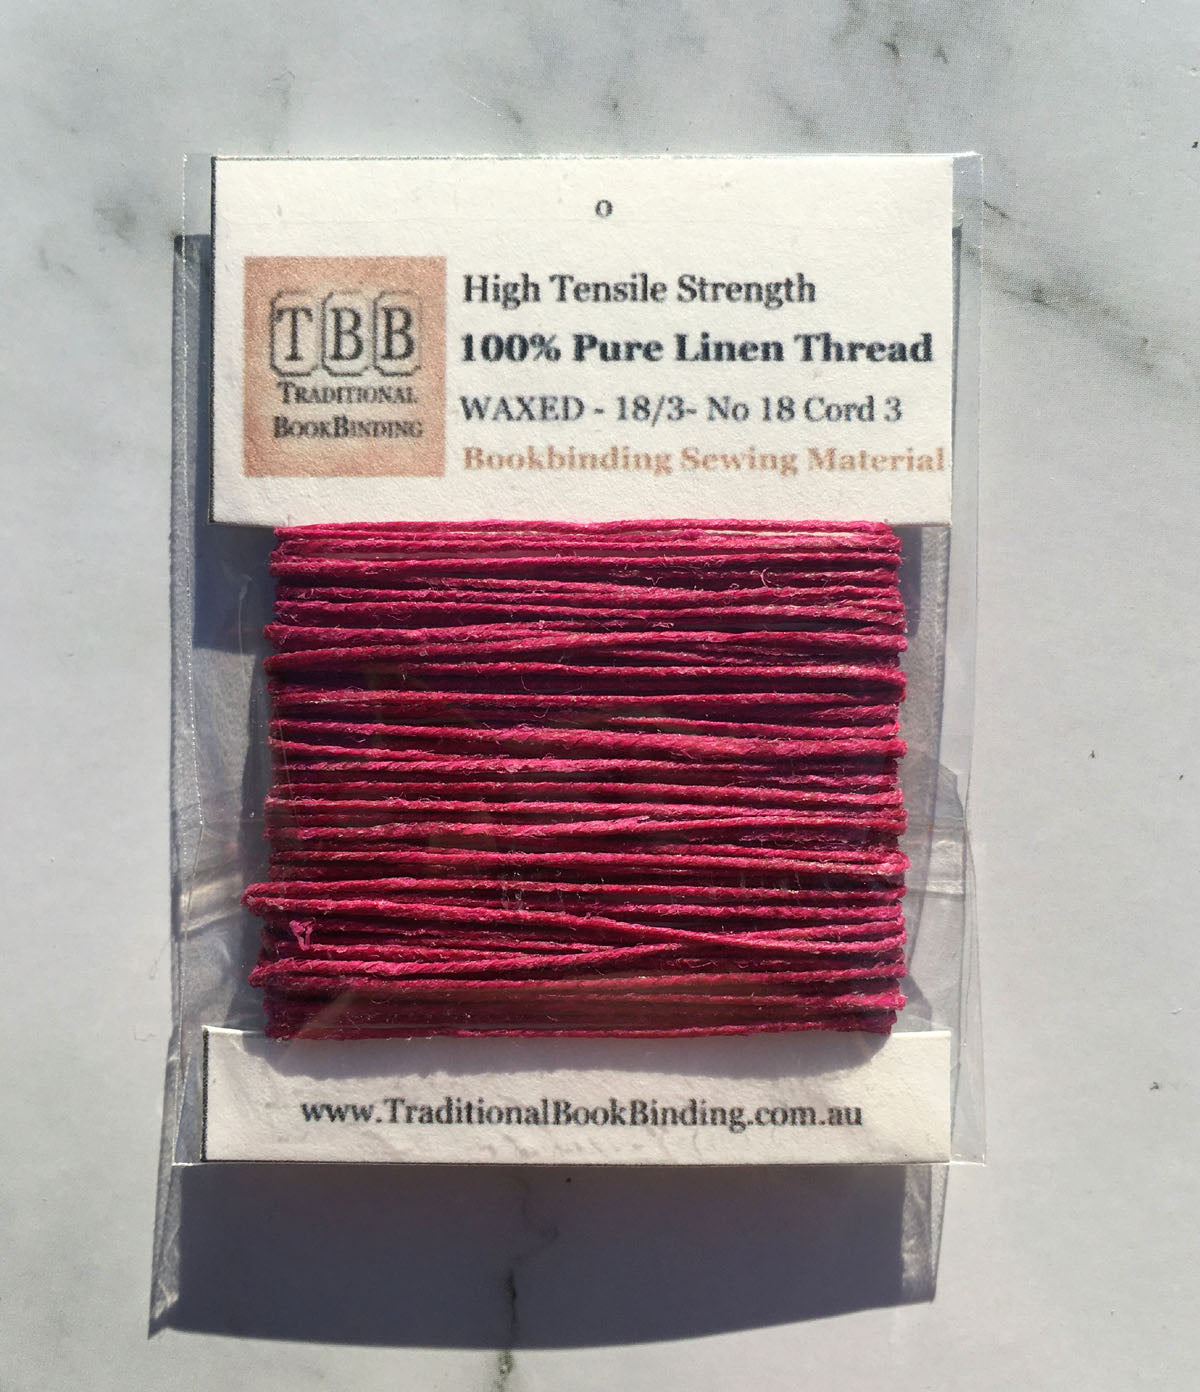 ALIZARIN-100% Pure Linen Thread- Waxed- 18/3 No.18 Cord 3- Approx 0.55mm thick